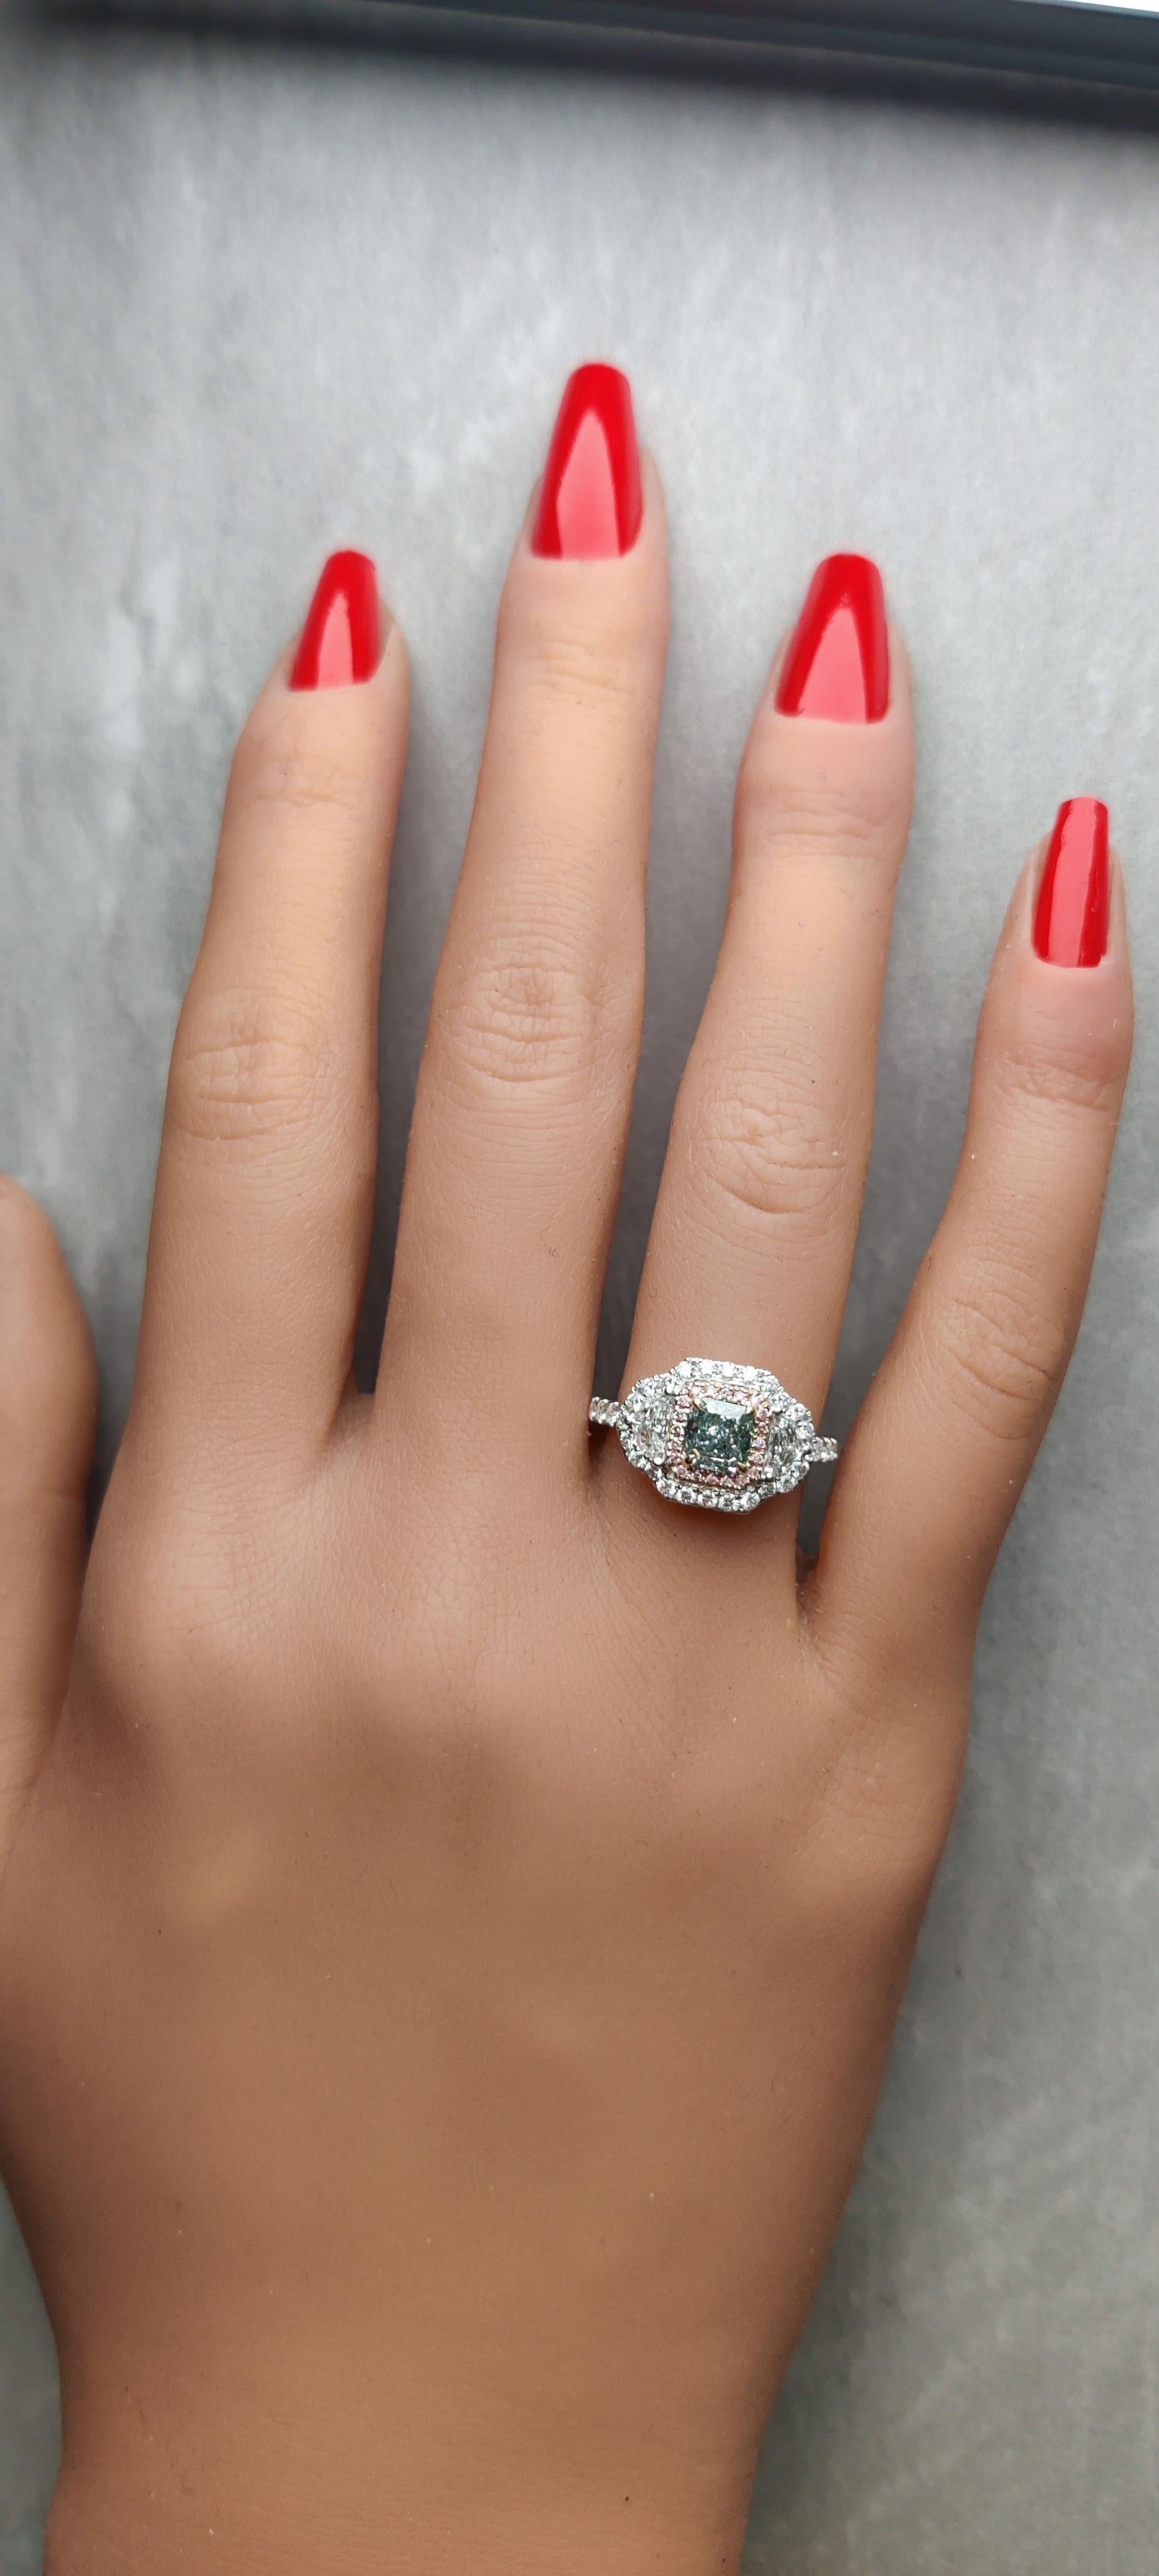 RareGemWorld's classic GIA certified diamond ring. Mounted in a beautiful 18K Rose and White Gold setting with a natural asscher cut green diamond. The green diamond is surrounded by natural epaulette cut white diamonds, round natural white diamond